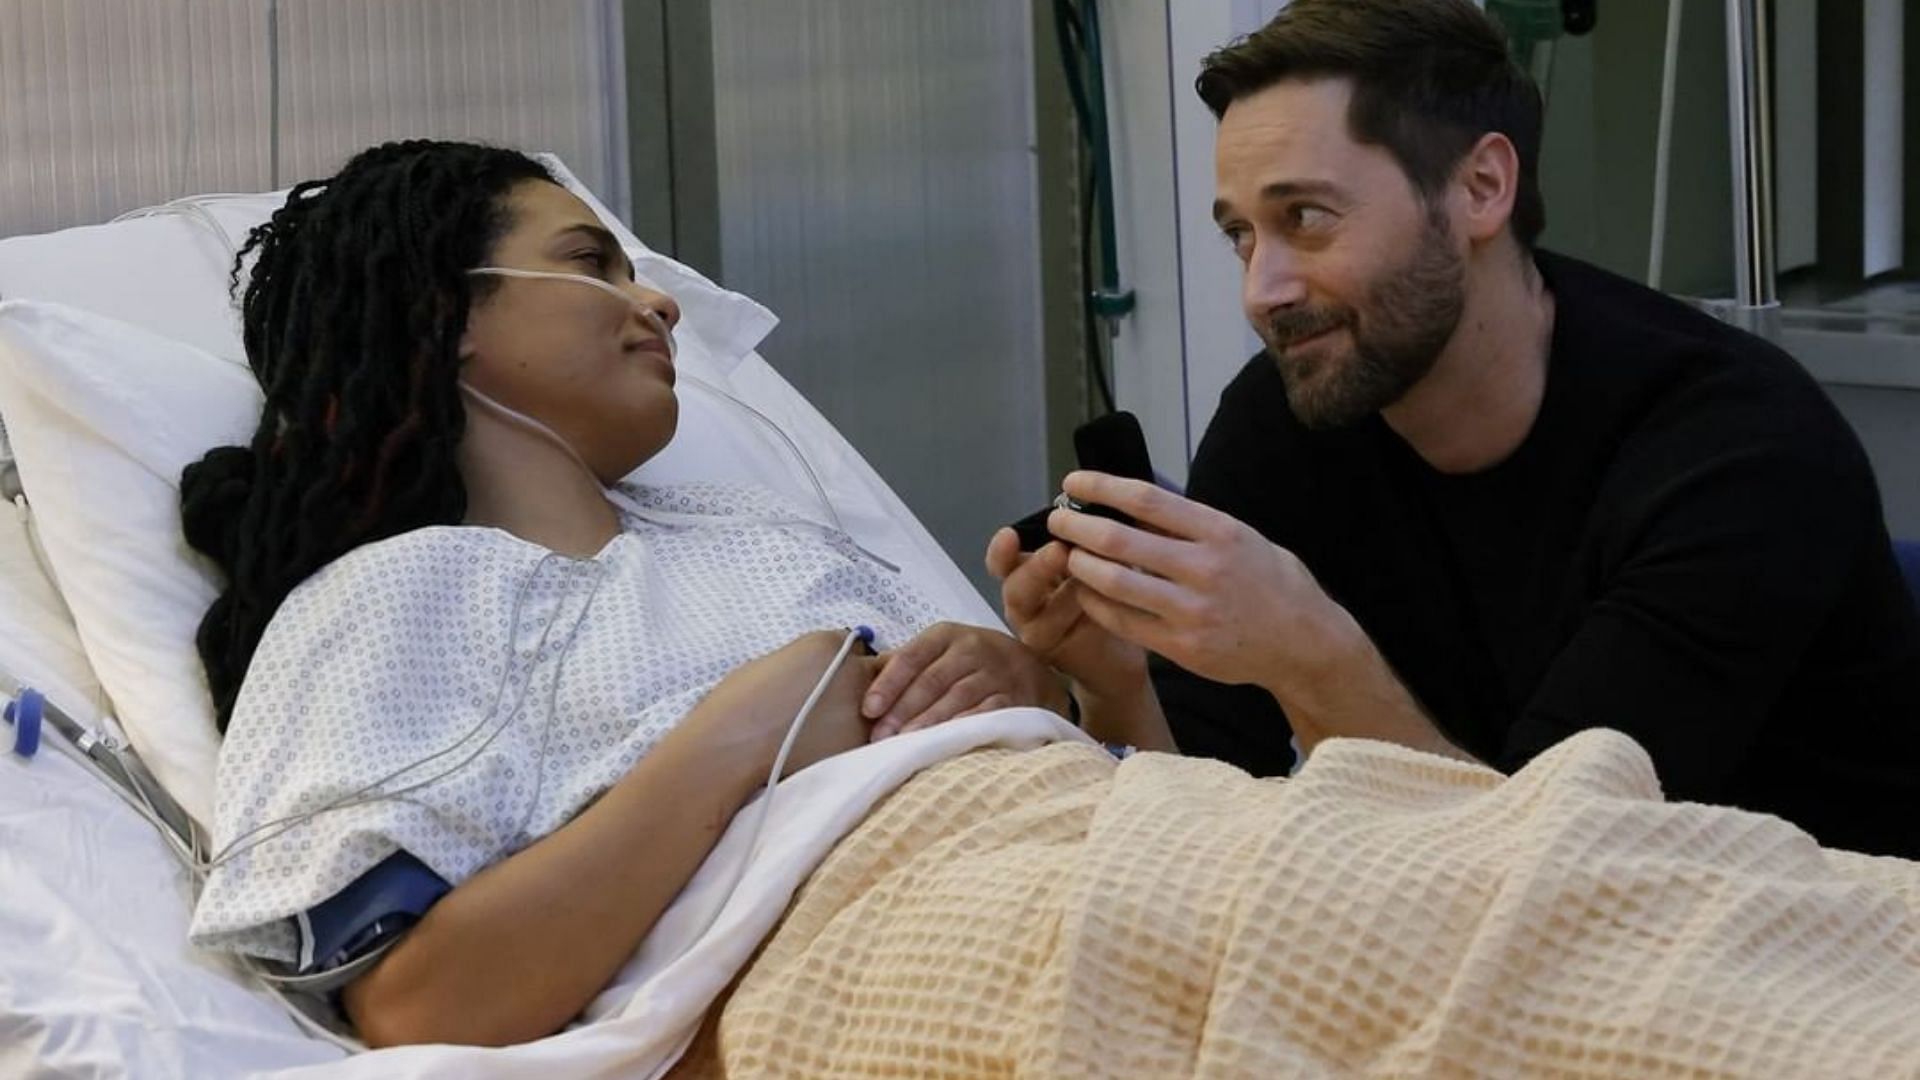 Amsterdam Season 4 Episode 22 will arrive this May 24, 2022, on NBC (Image Via nbcnewamsterdam/Instagram)